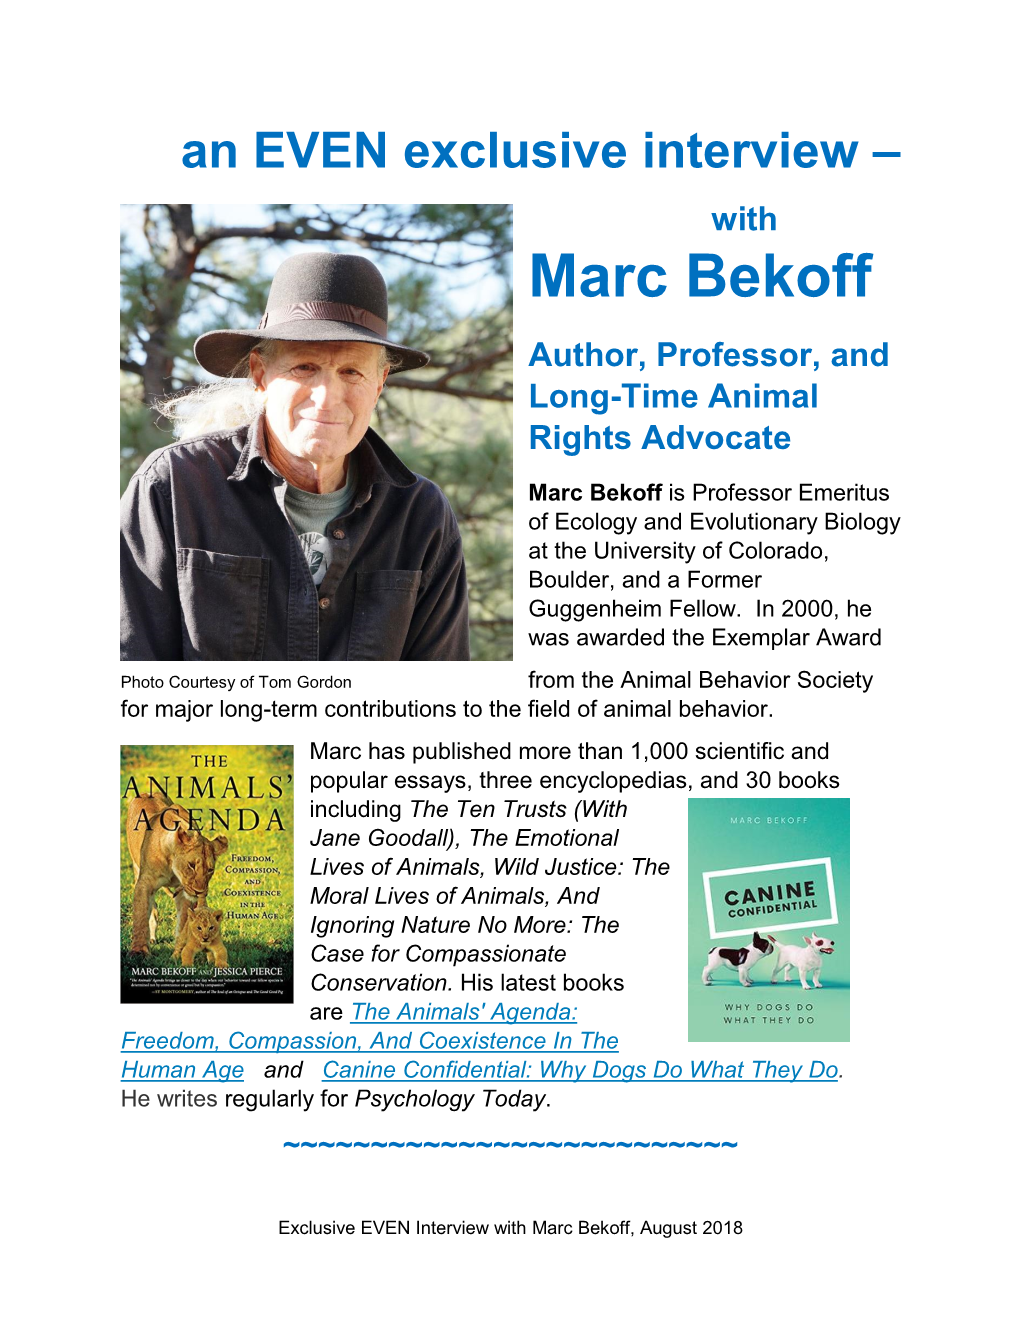 Marc Bekoff Author, Professor, and Long-Time Animal Rights Advocate